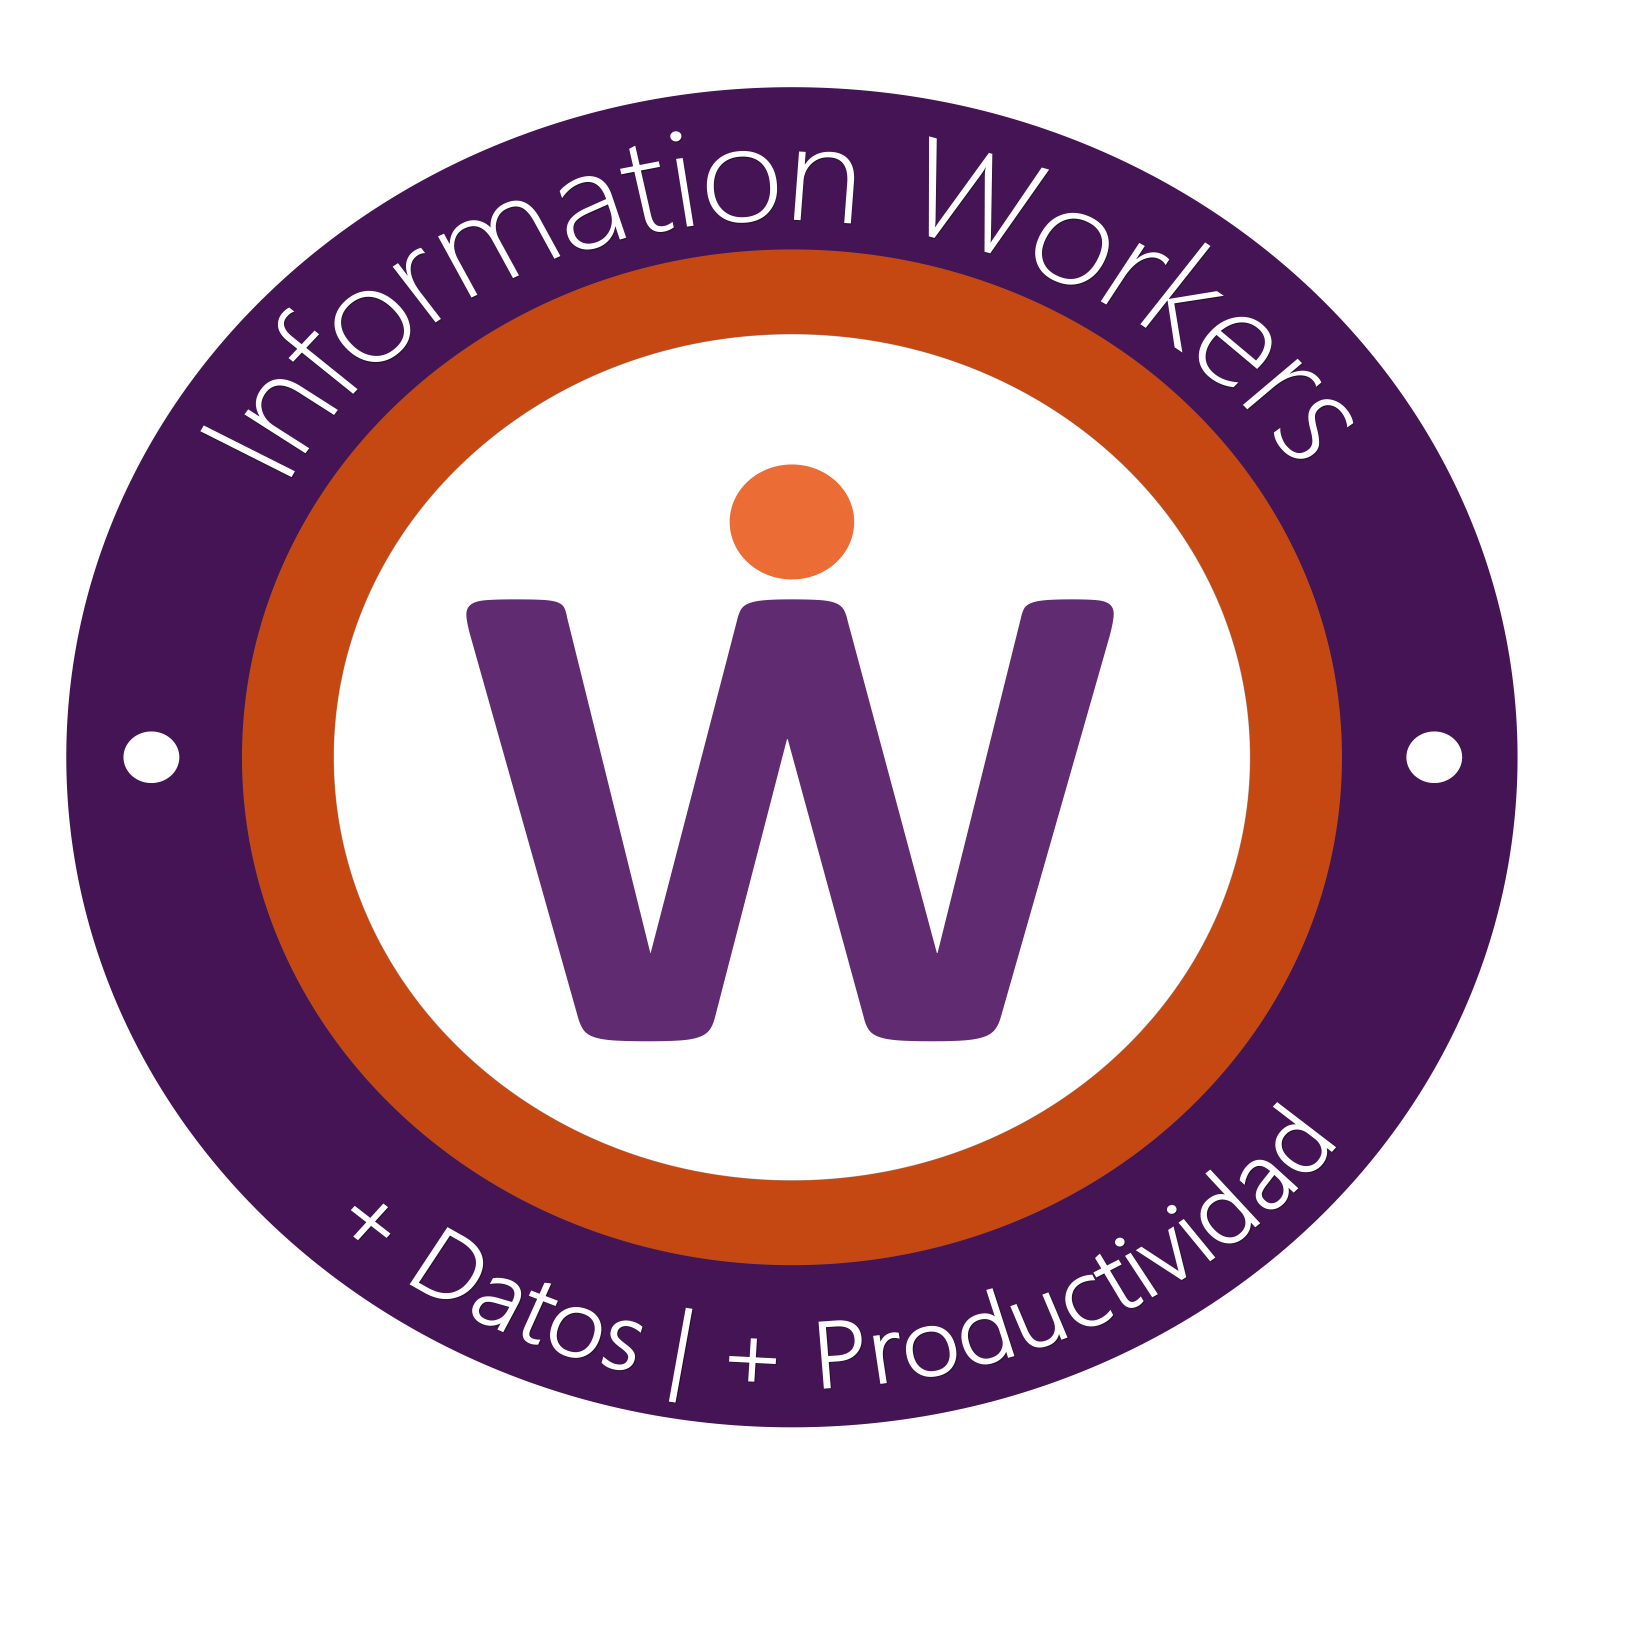 Information Workers